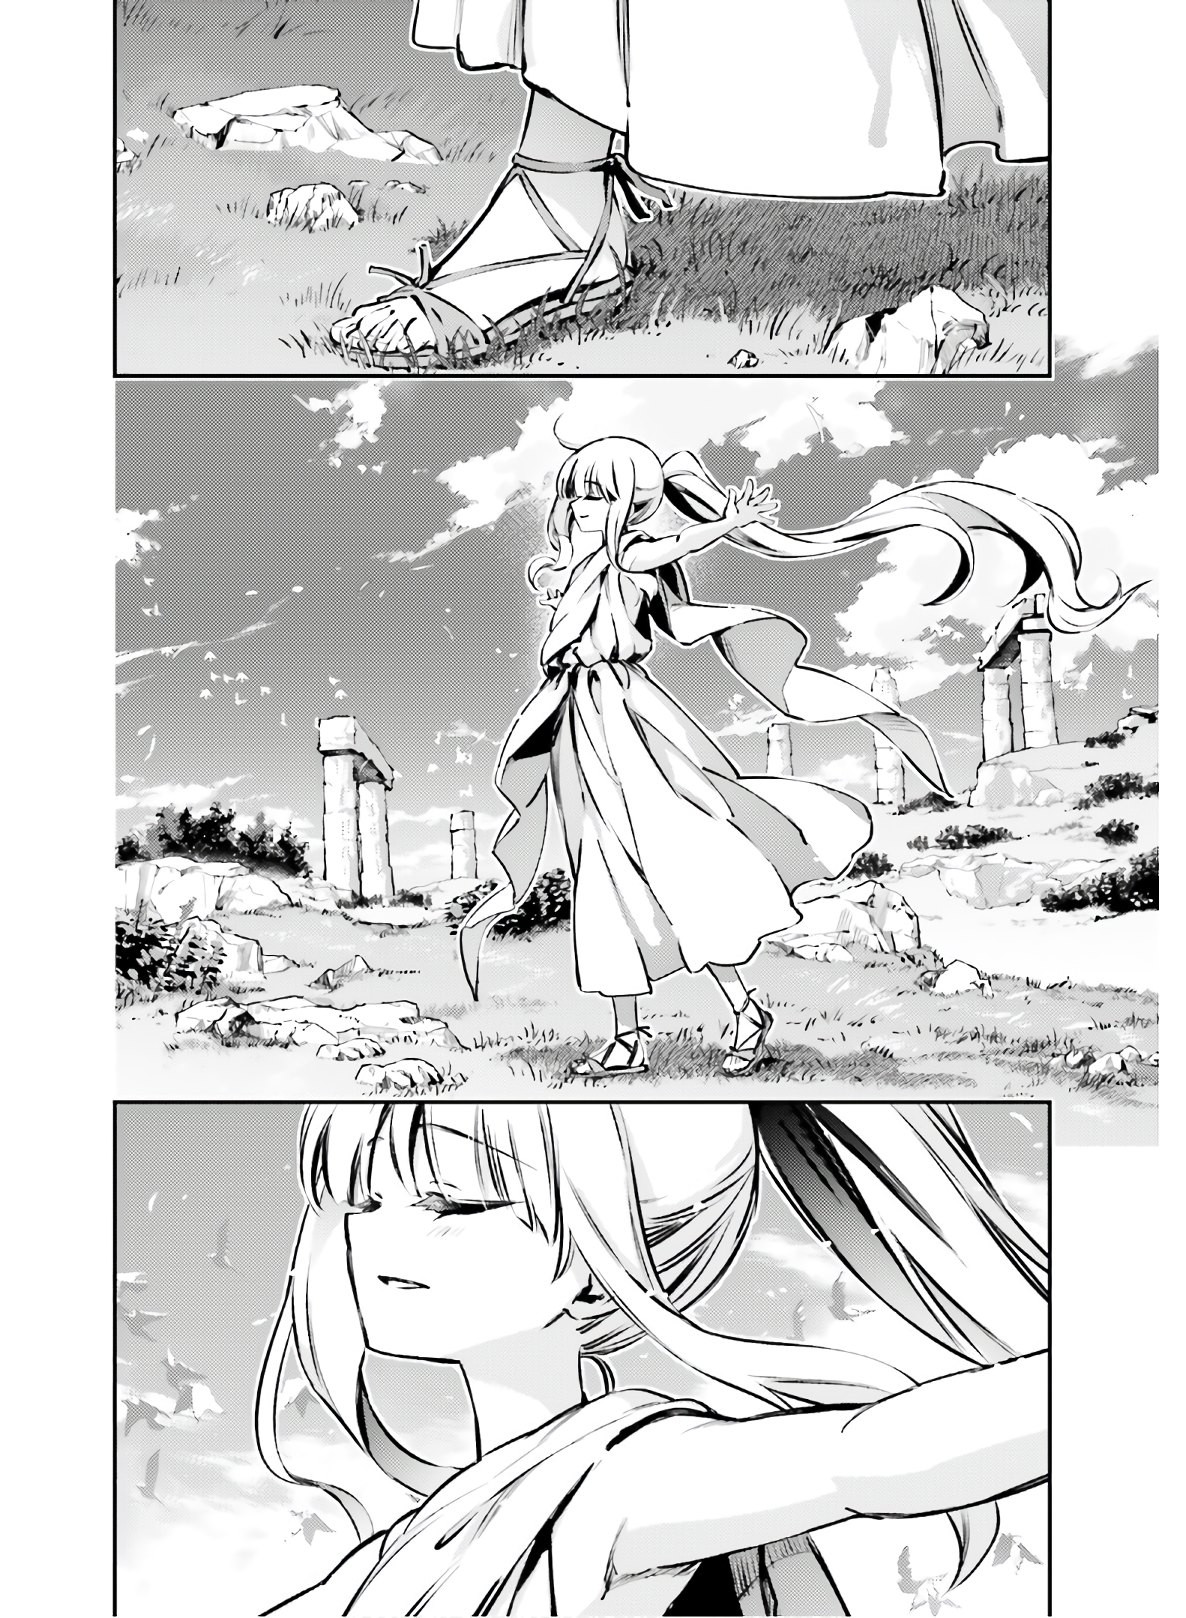 Fate/Kaleid Liner Prisma Illya Drei! - Chapter 64 - Page 8